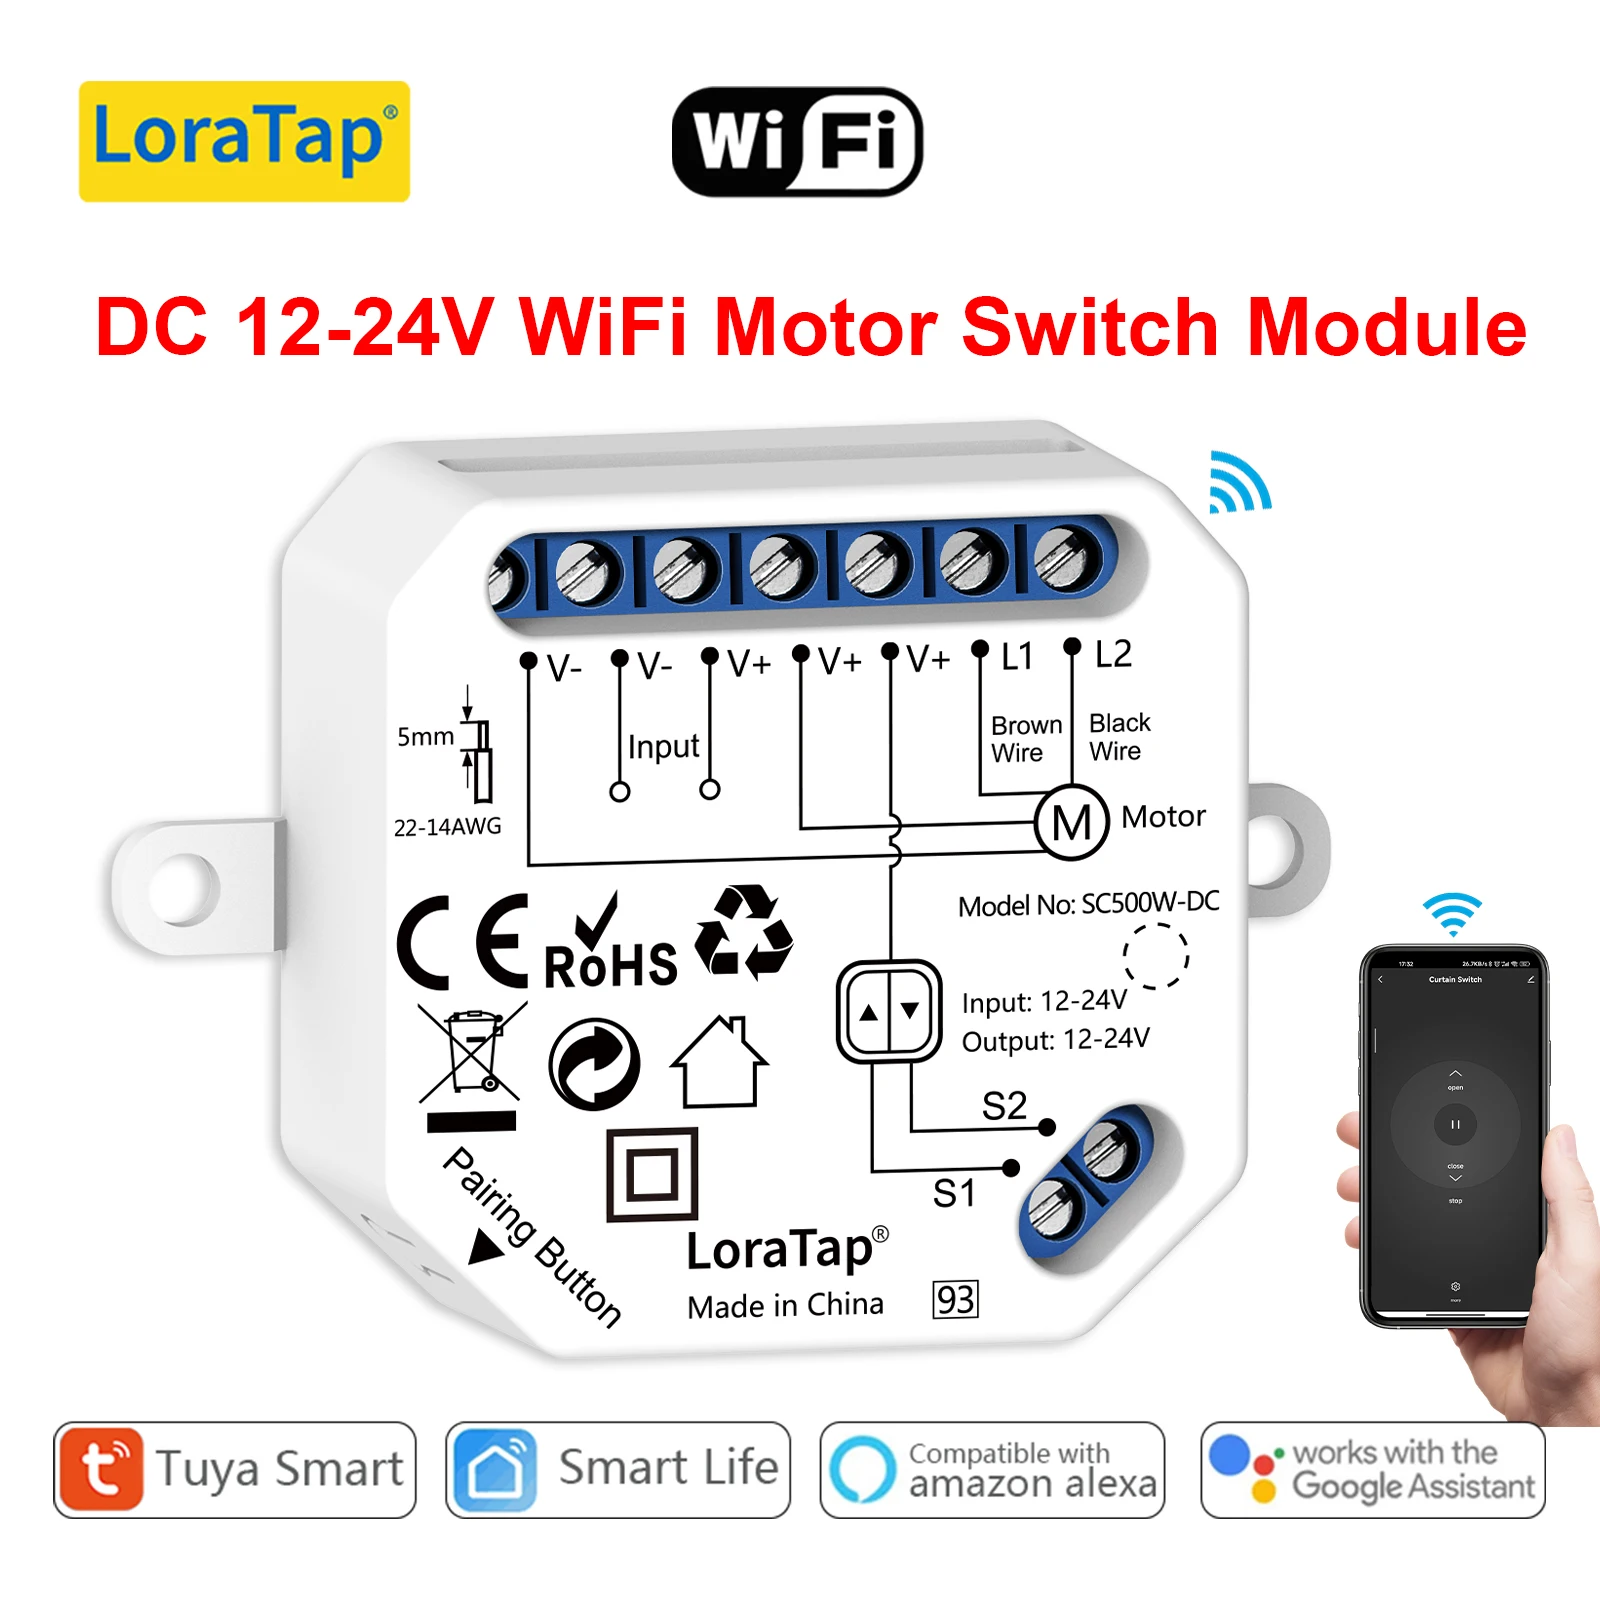 LoraTap Tuya Smart Life DC 12-24V Switch Module for Roller Shutter Pool Cover Electric Motor Voice Control by Google Home Alexa